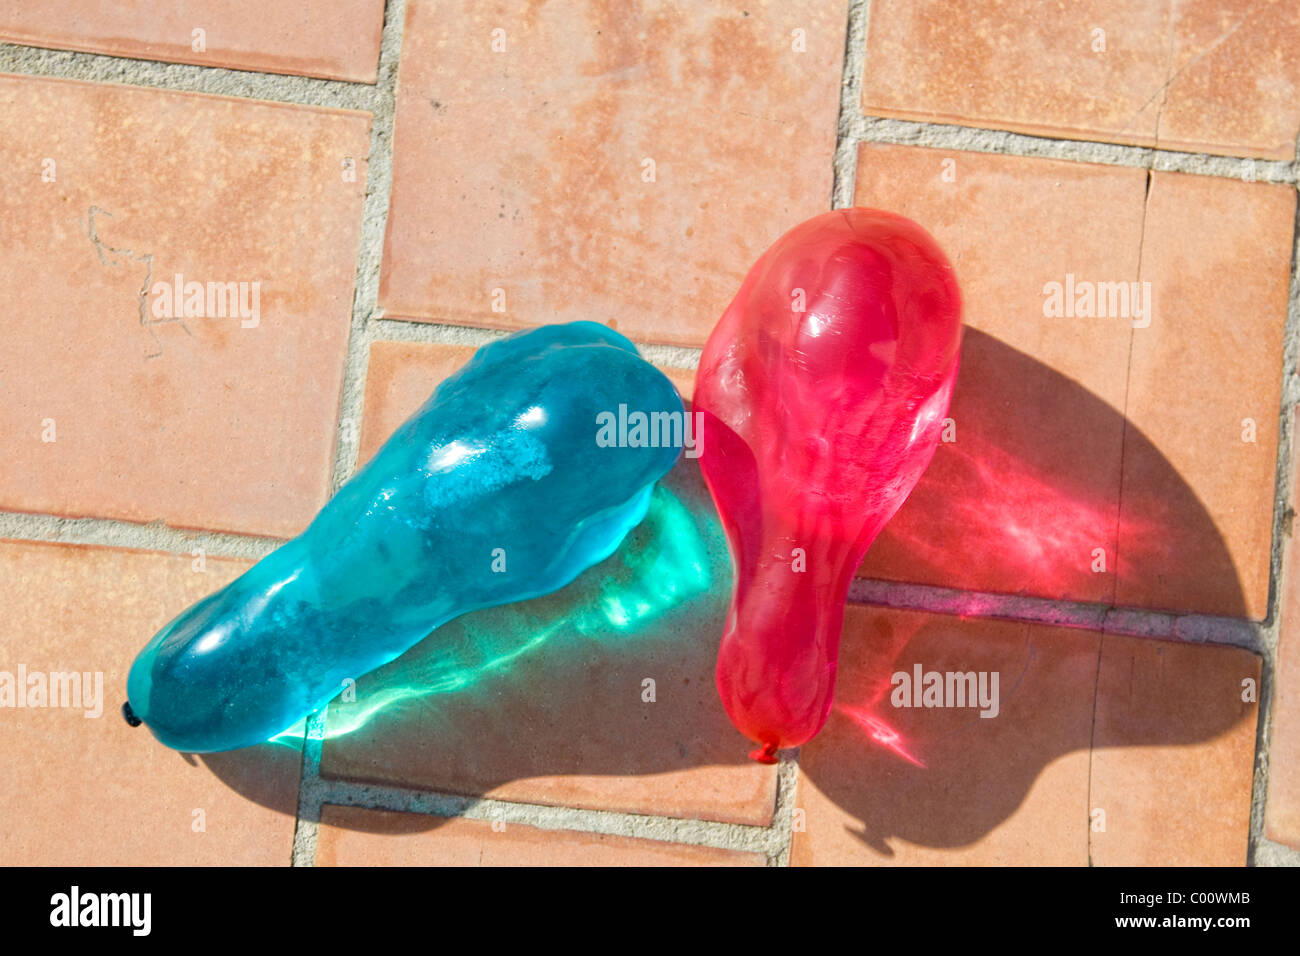 Two water filled colored balloons crashing against the floor Stock Photo